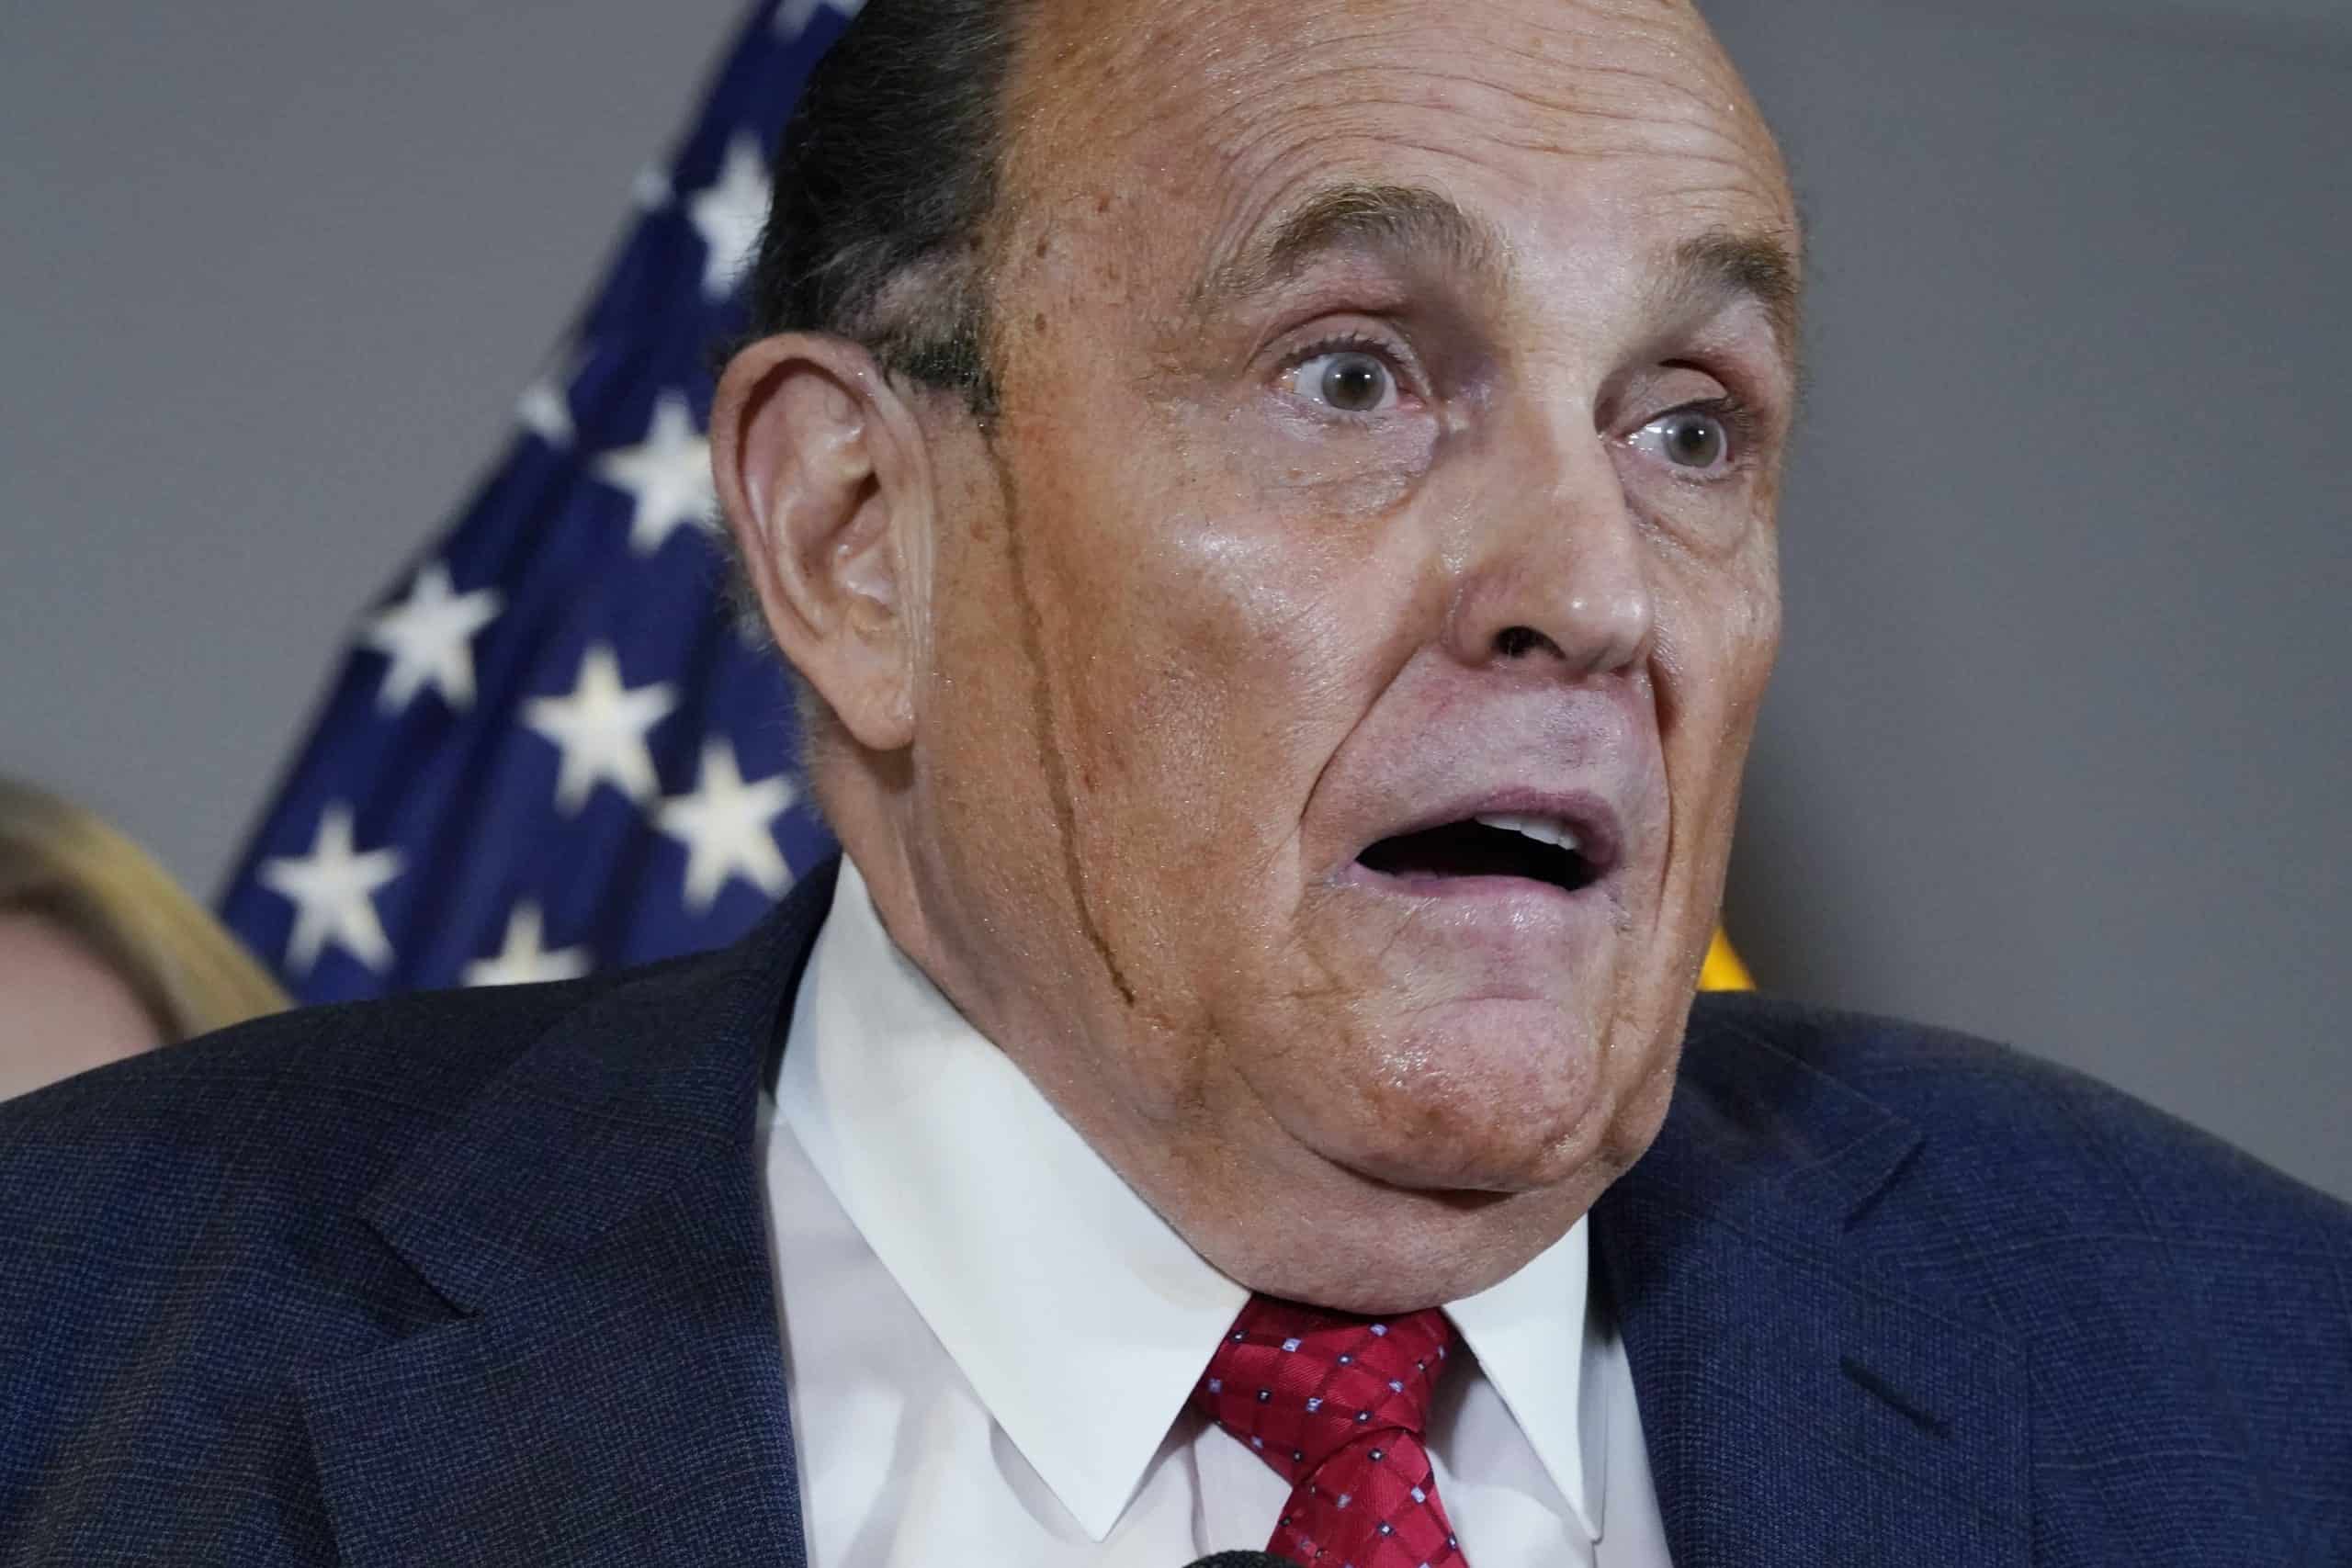 Twitter reacts as Rudy Giuliani’s face melts during erratic voter fraud speech